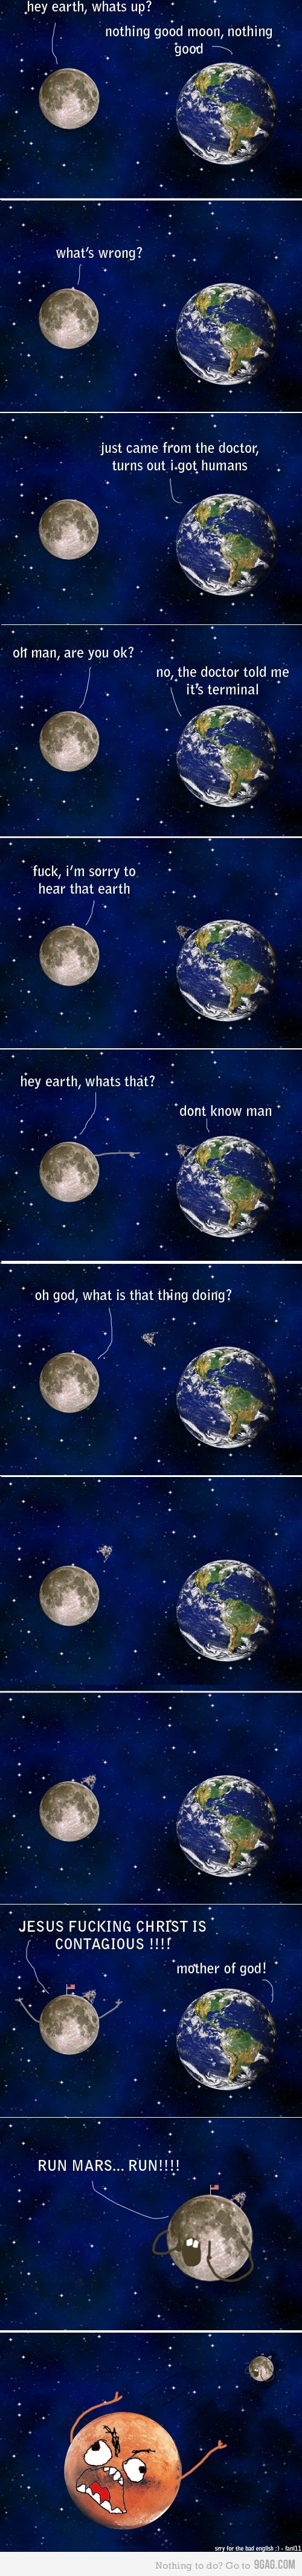 Humanity And Earth Funny Illustration